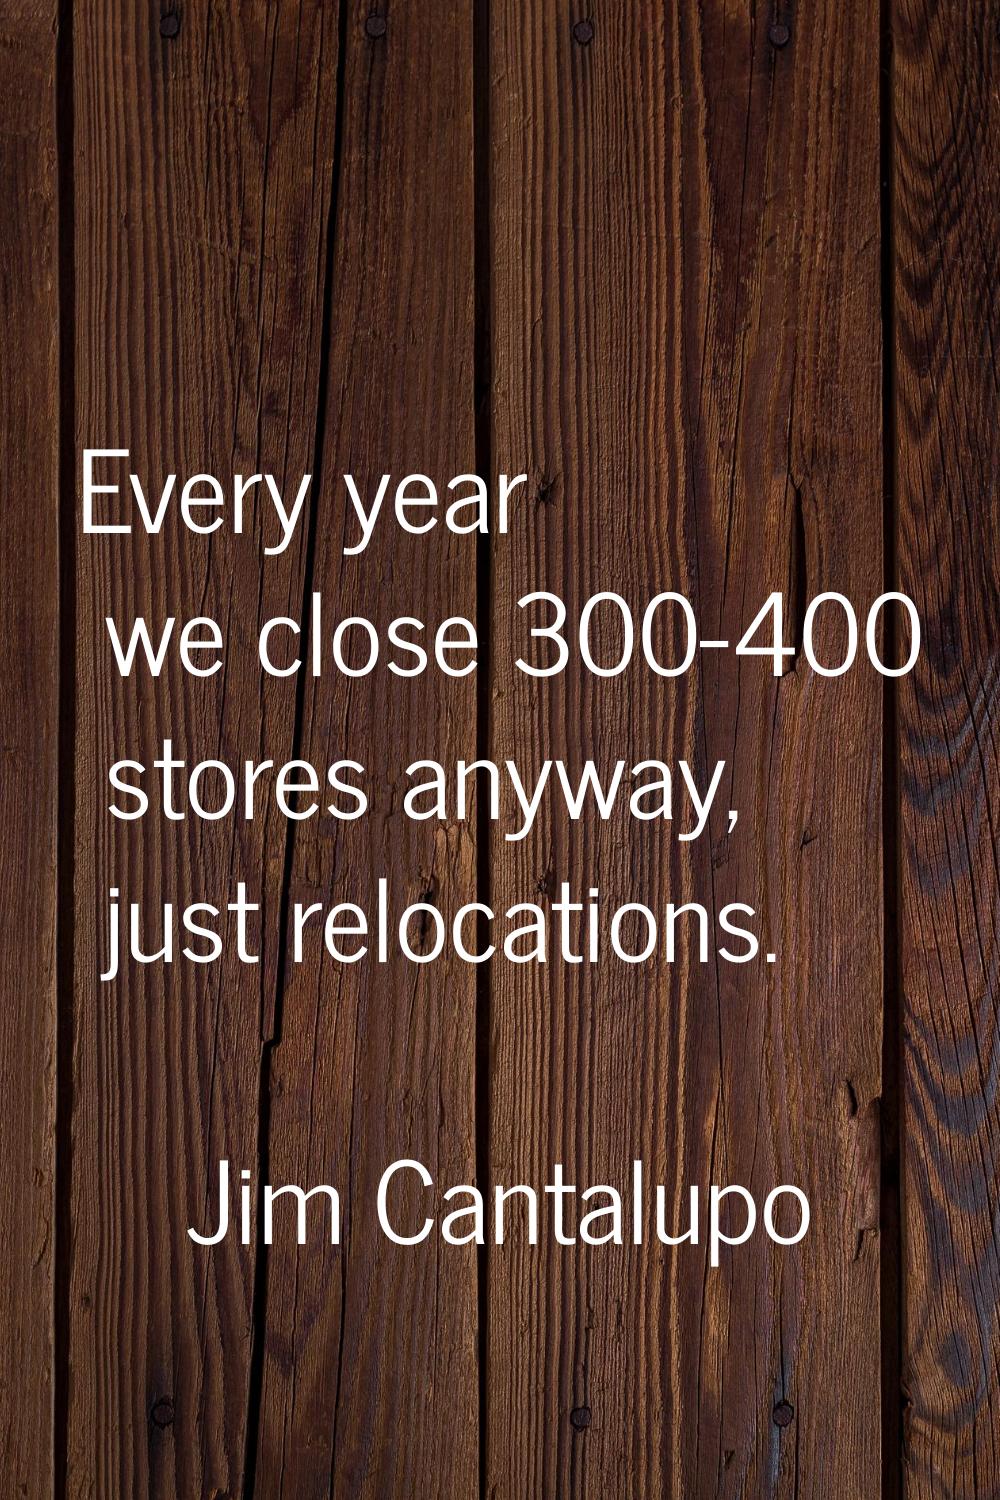 Every year we close 300-400 stores anyway, just relocations.